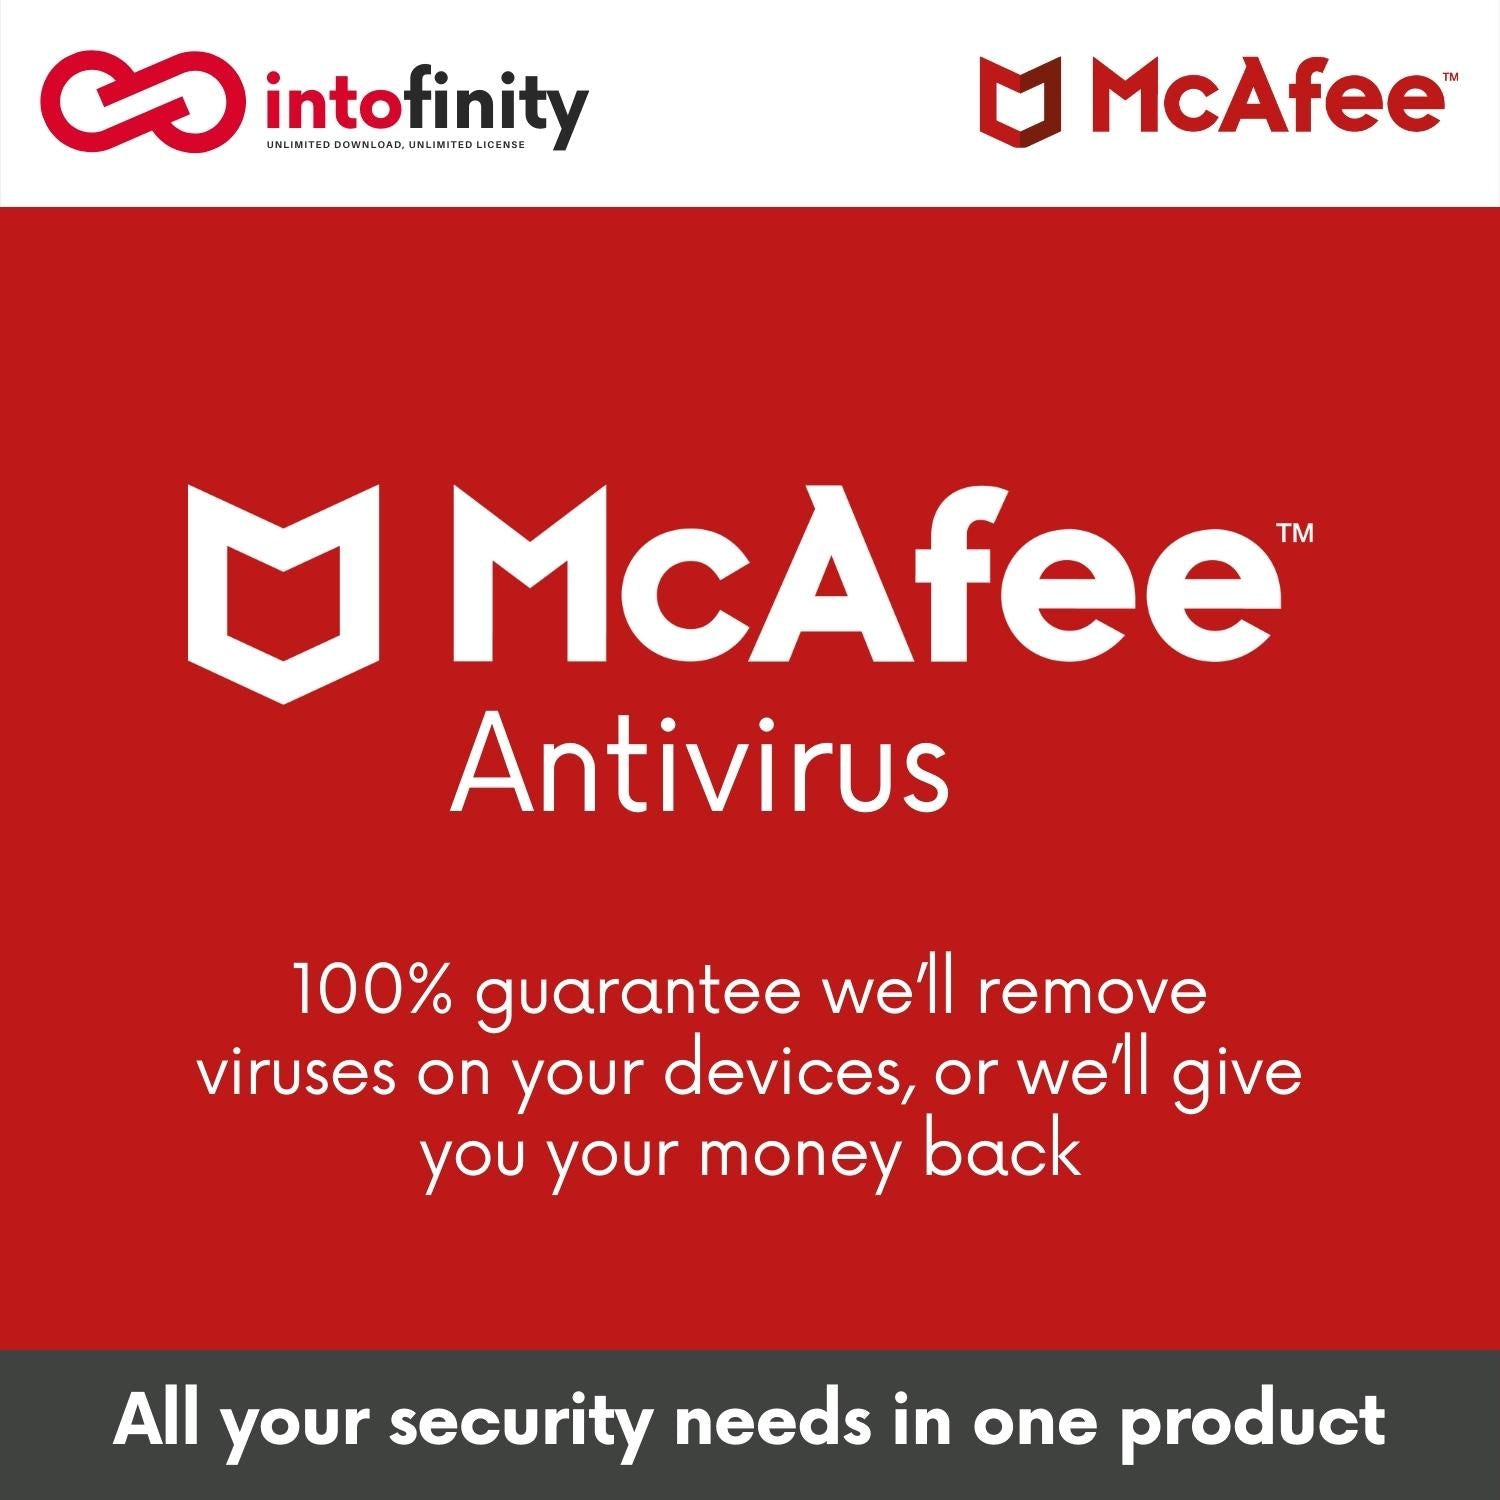 Support mcafee chat McAfee Antivirus